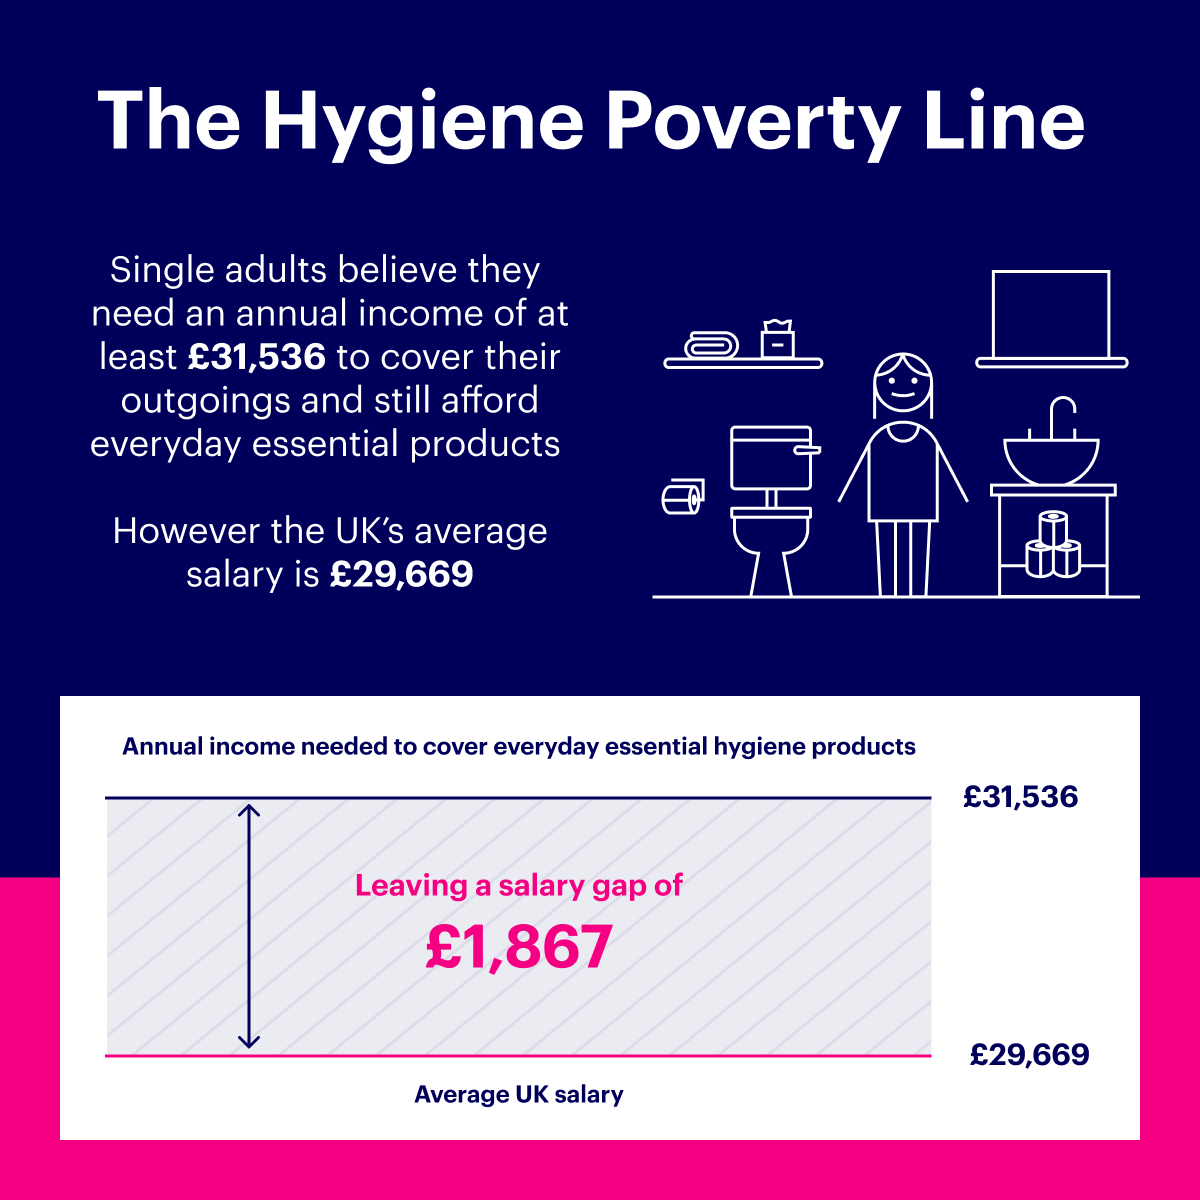 The extent of hygiene poverty is closer to many more people than we may think. We’re proud to once again support In Kind Direct's ‘Buy 2 Donate 1’ initiative on hygiene products, now live through #Tesco stores across the UK. #HygienePoverty #Essity #Bodyform #TENA #IKD